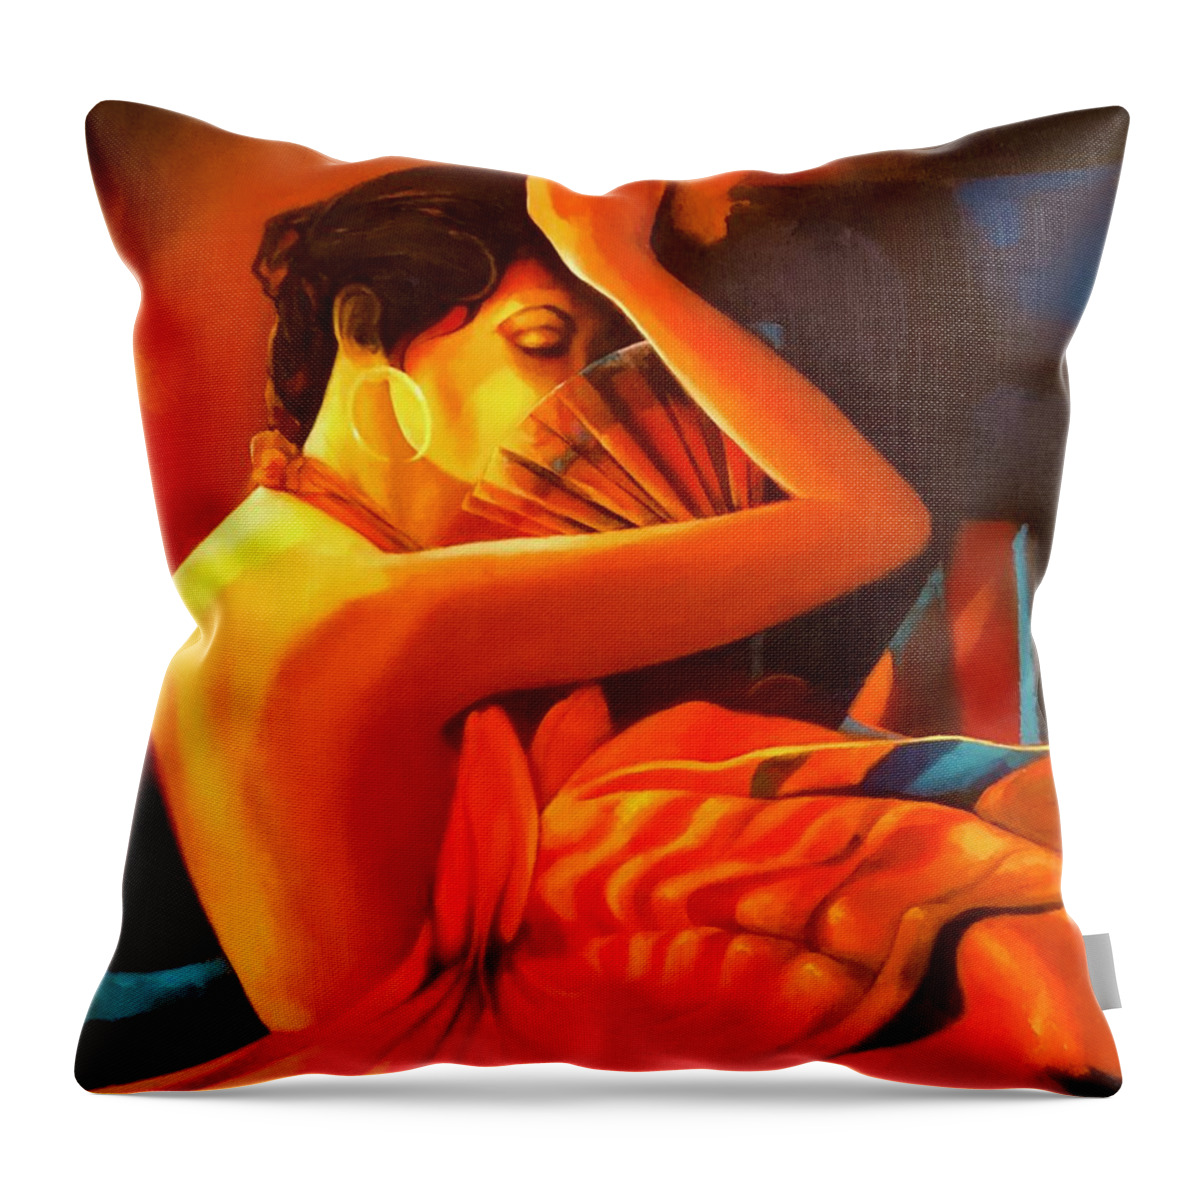  Throw Pillow featuring the painting Felicia by Grus Lindgren